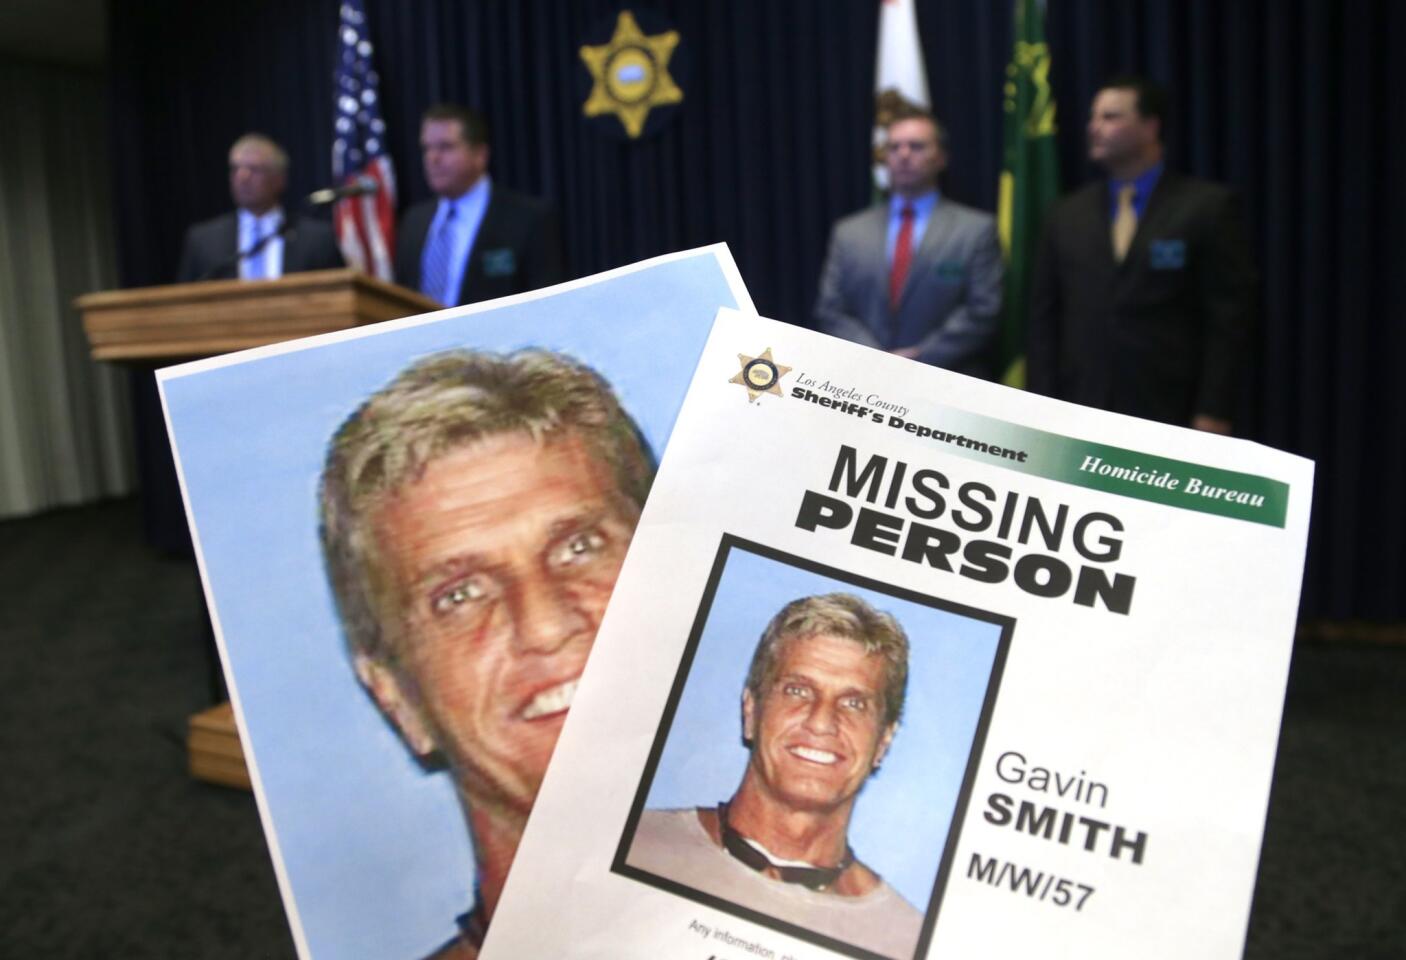 Missing person posters